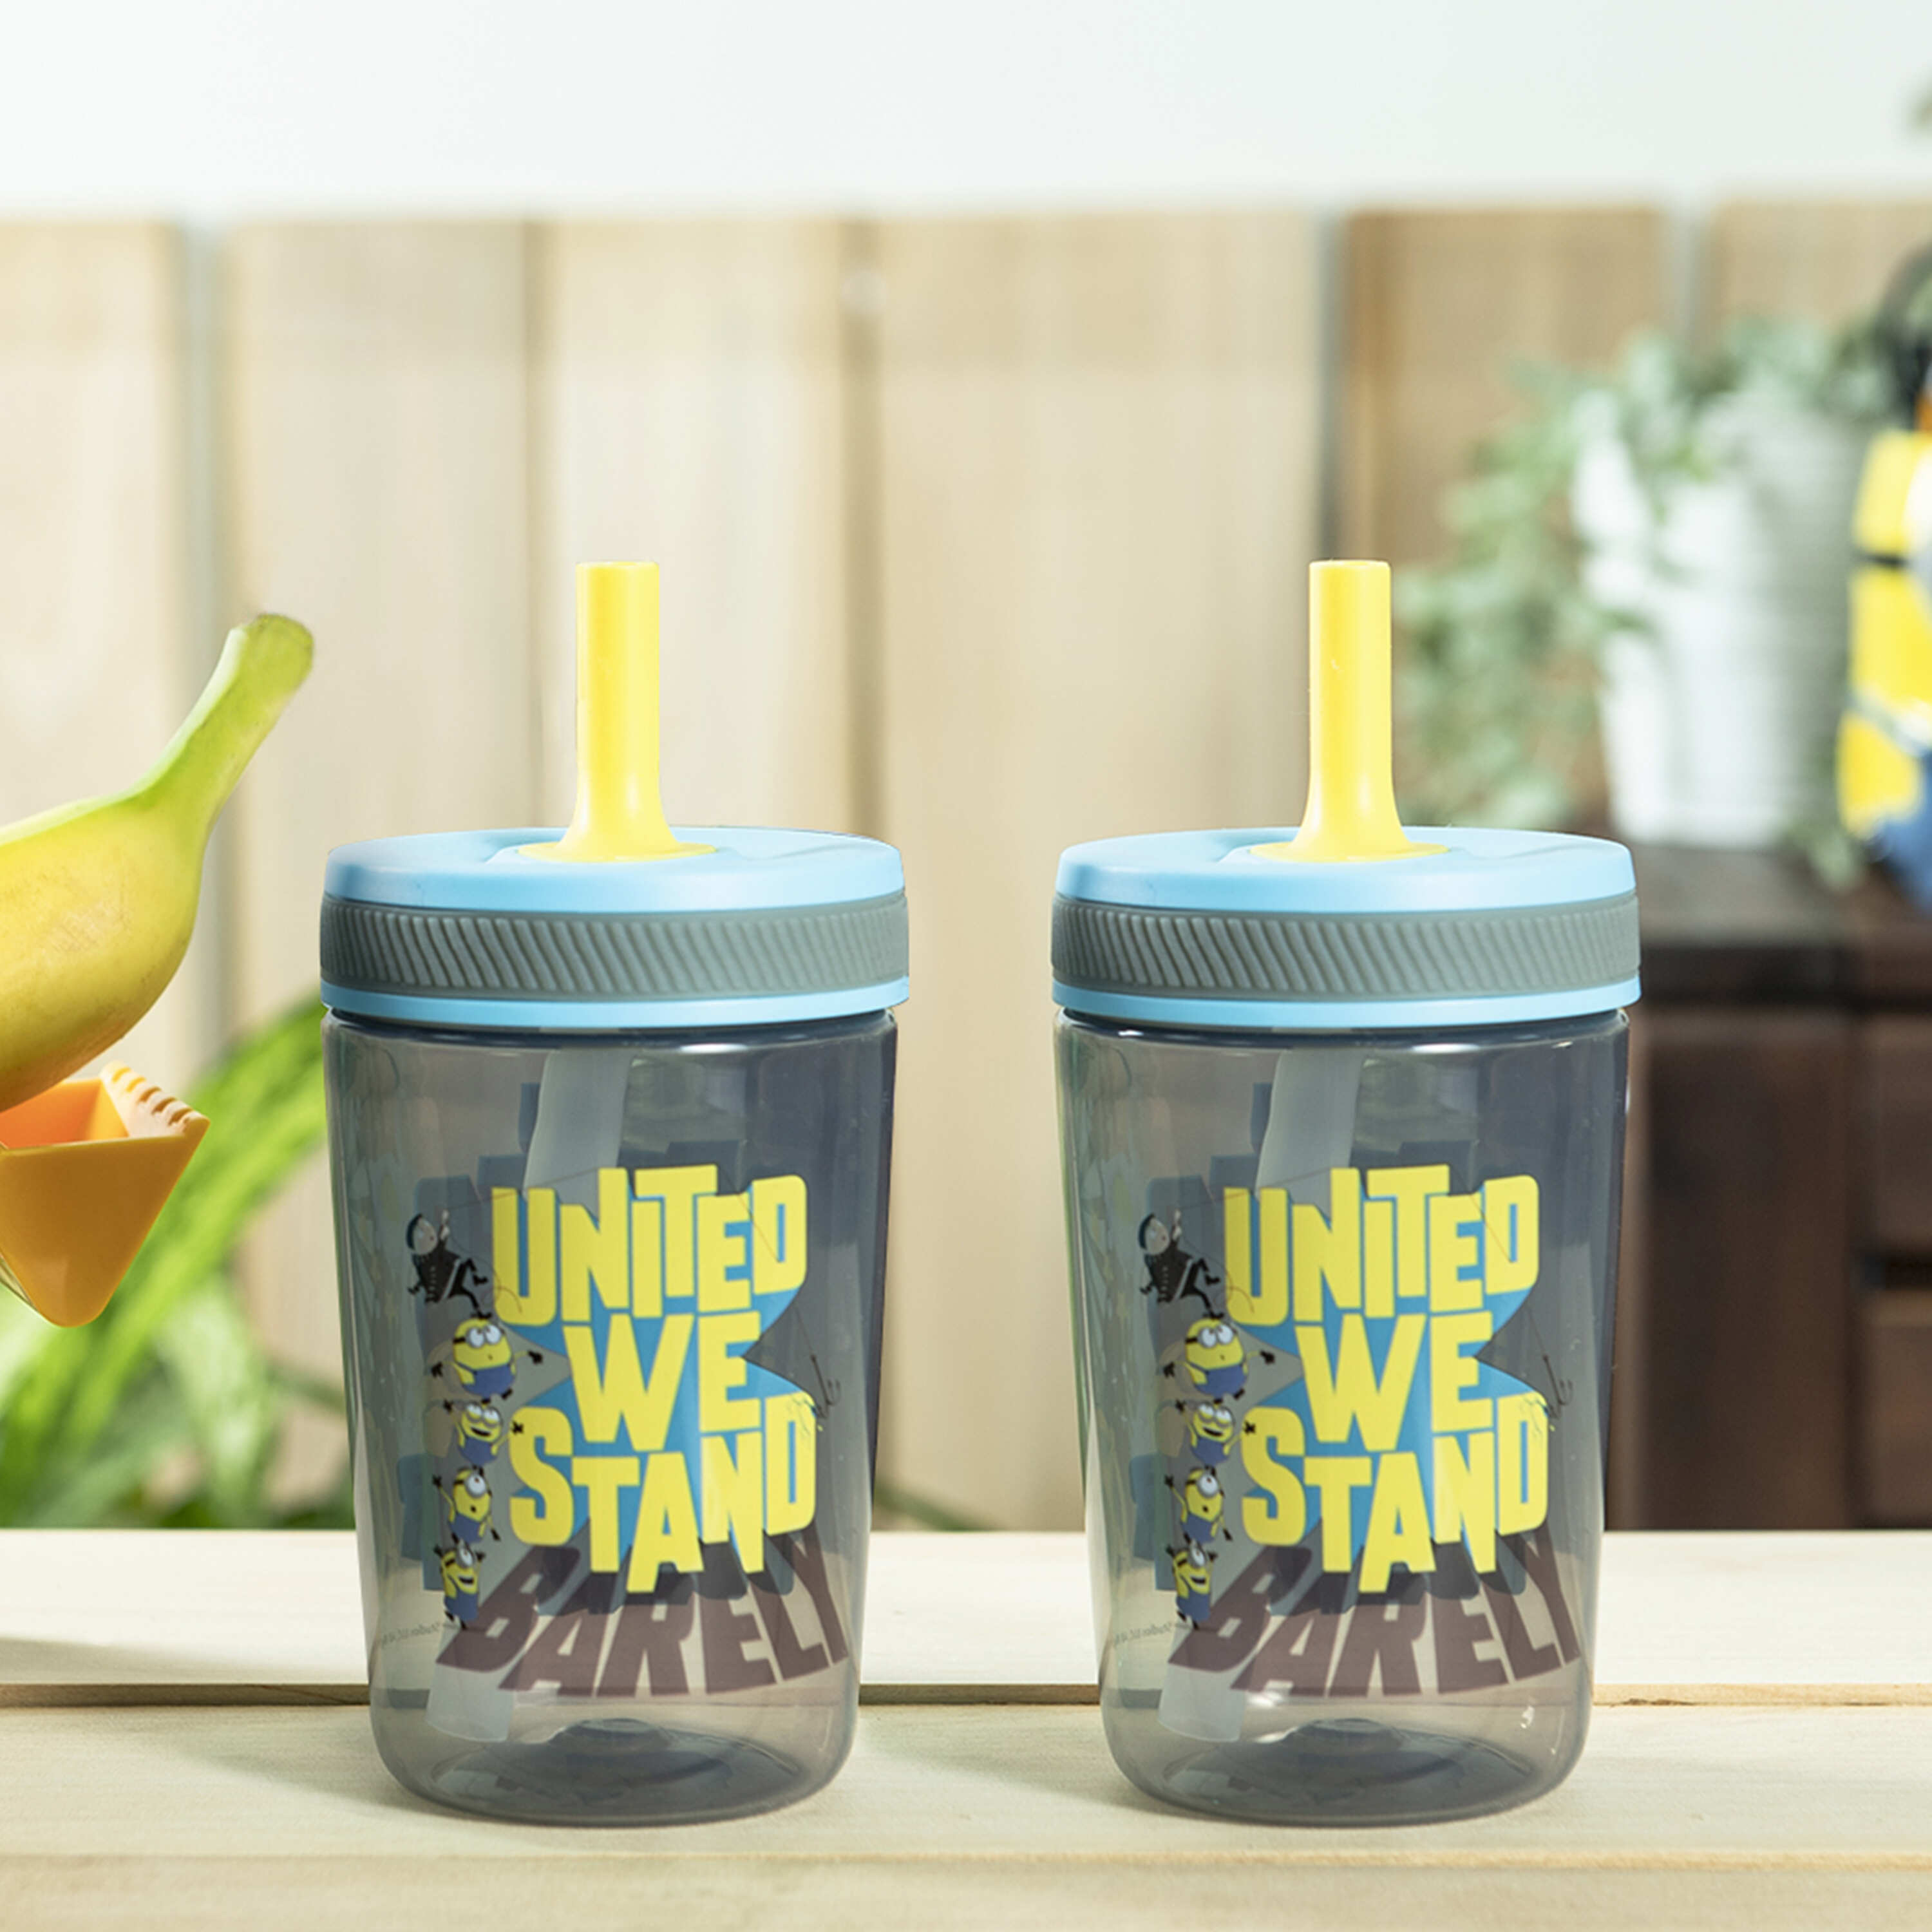 Minions by Universal Studios Ages 3+ 5.5" Plastic Cup by Zak Designs 2016 